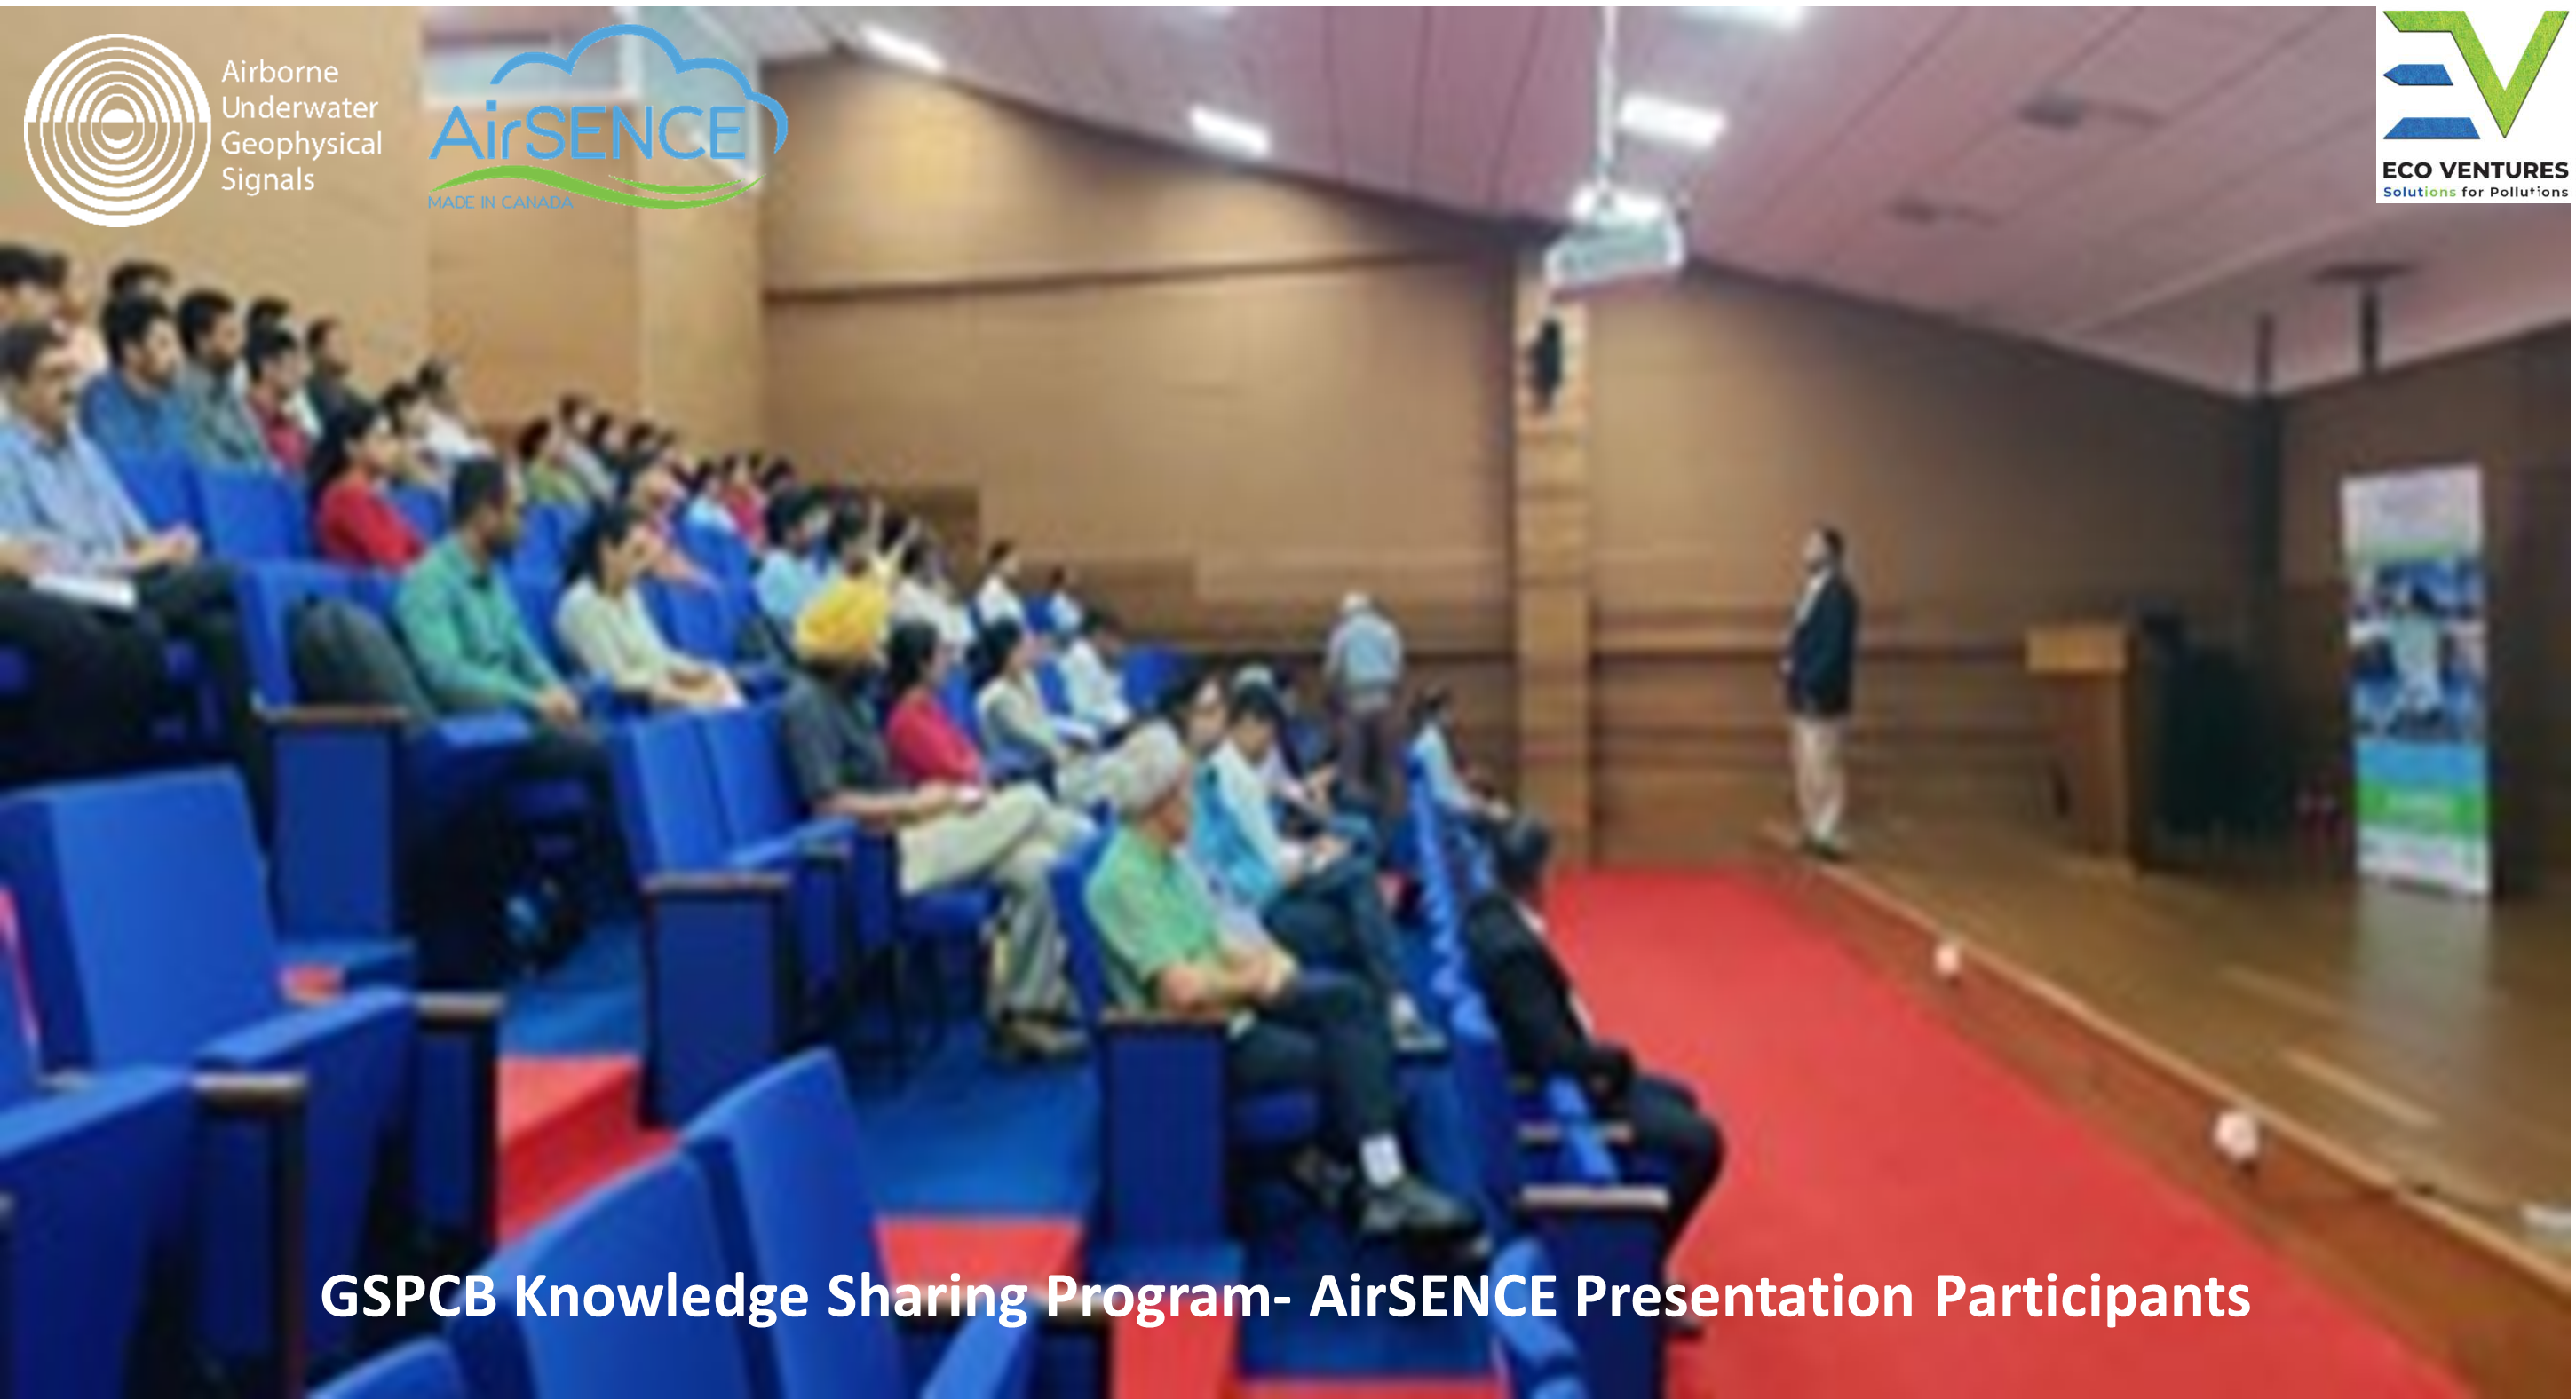 AirSENCE showcase in GSPCB, India